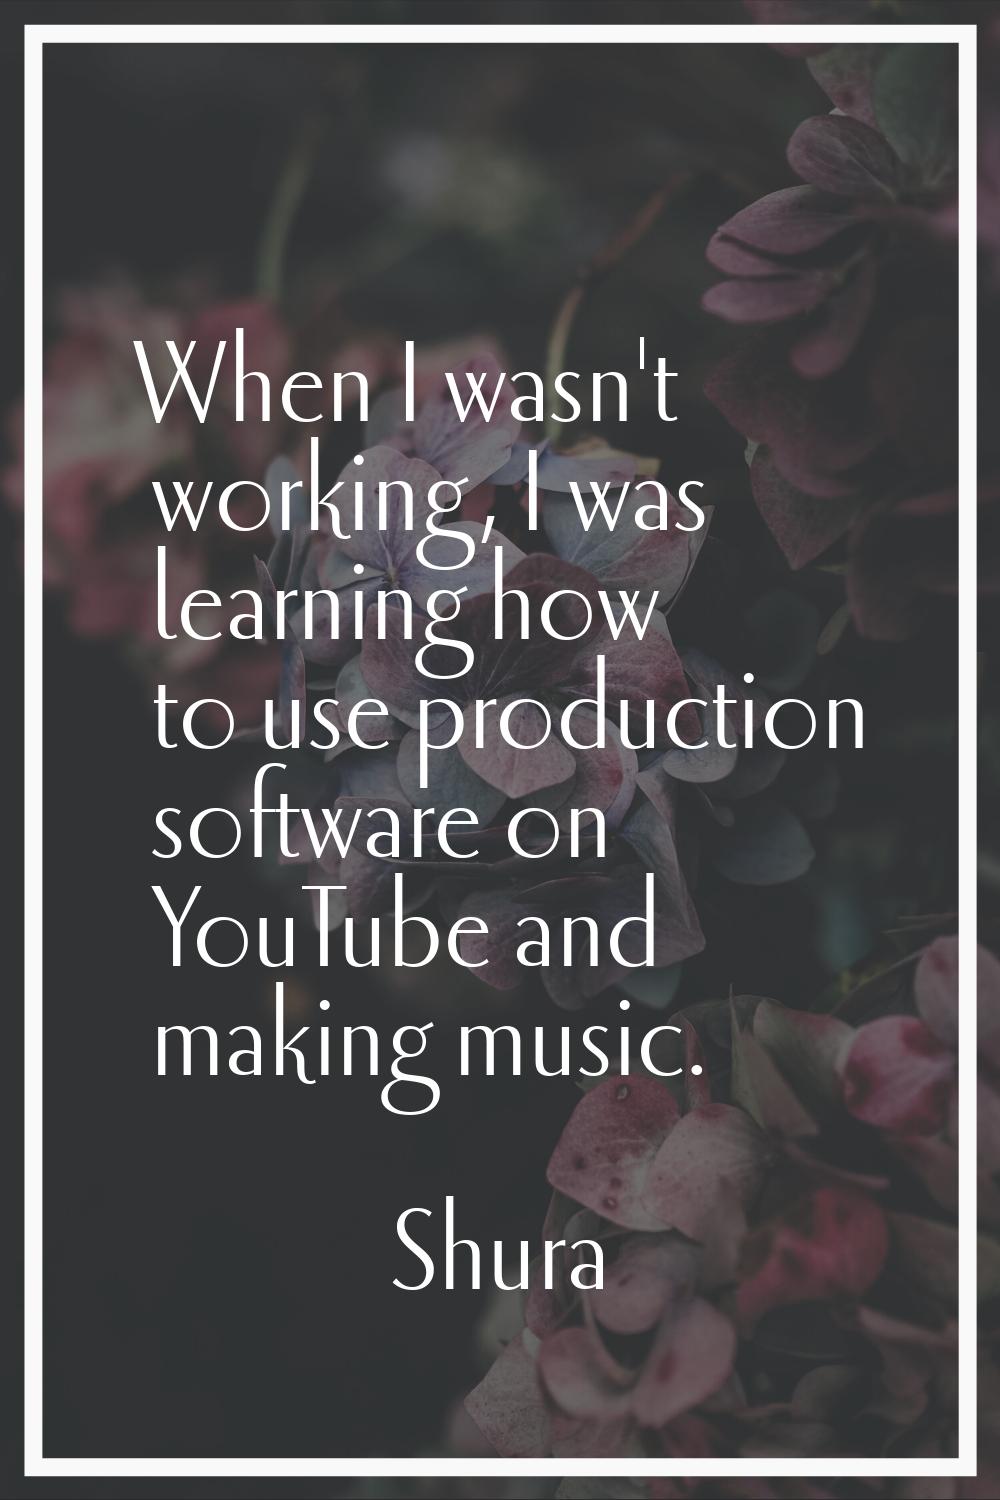 When I wasn't working, I was learning how to use production software on YouTube and making music.